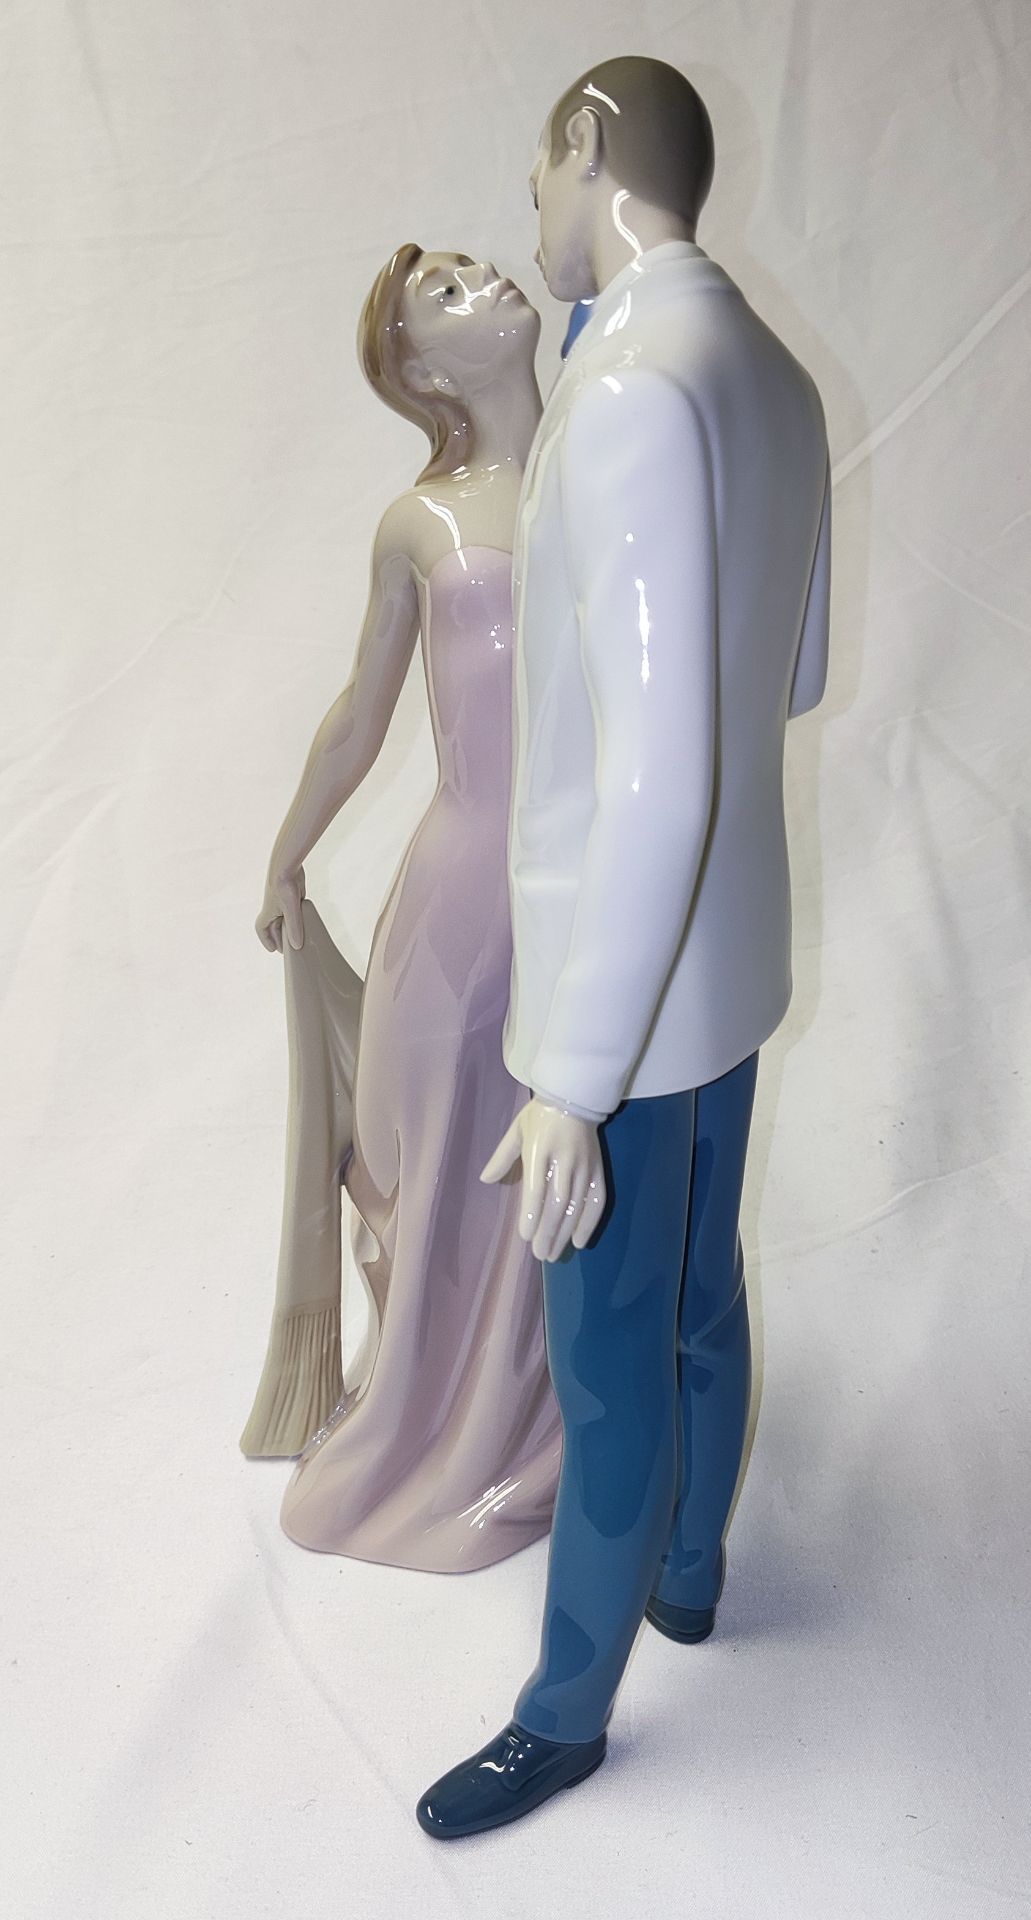 1 x LLADRO Happy Anniversary Porcelain Statue - New/Boxed - RRP £520.00 - Ref: /HOC232/HC5 - CL987 - - Image 25 of 25